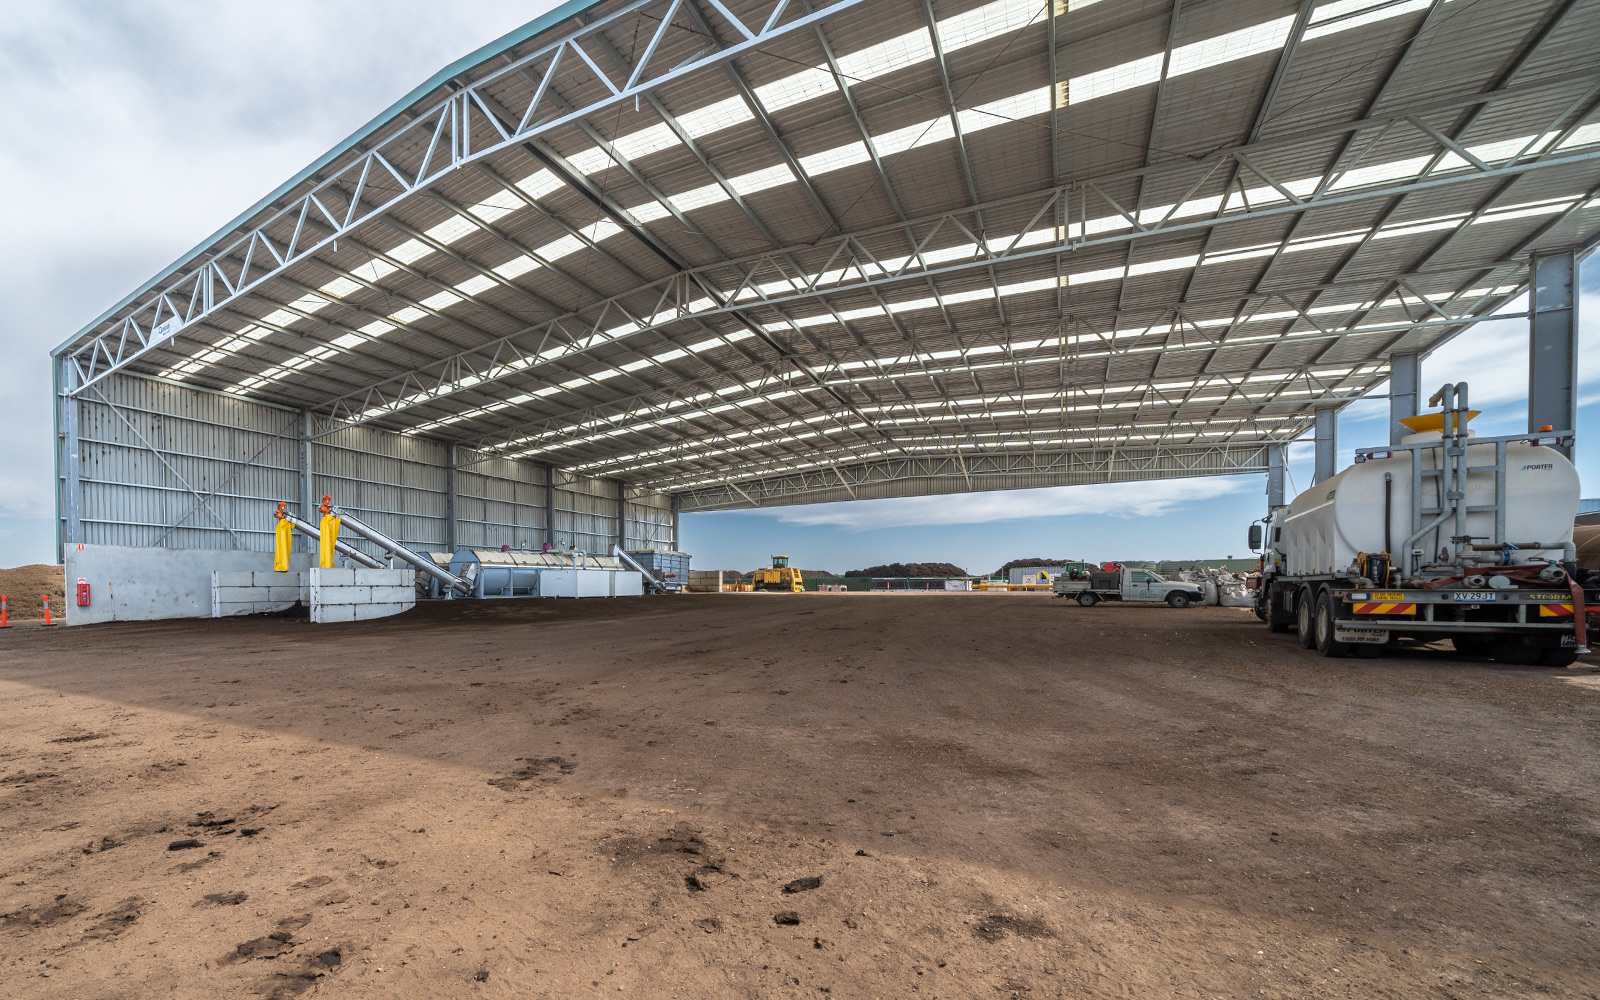 Geelong Council industrial storage facility